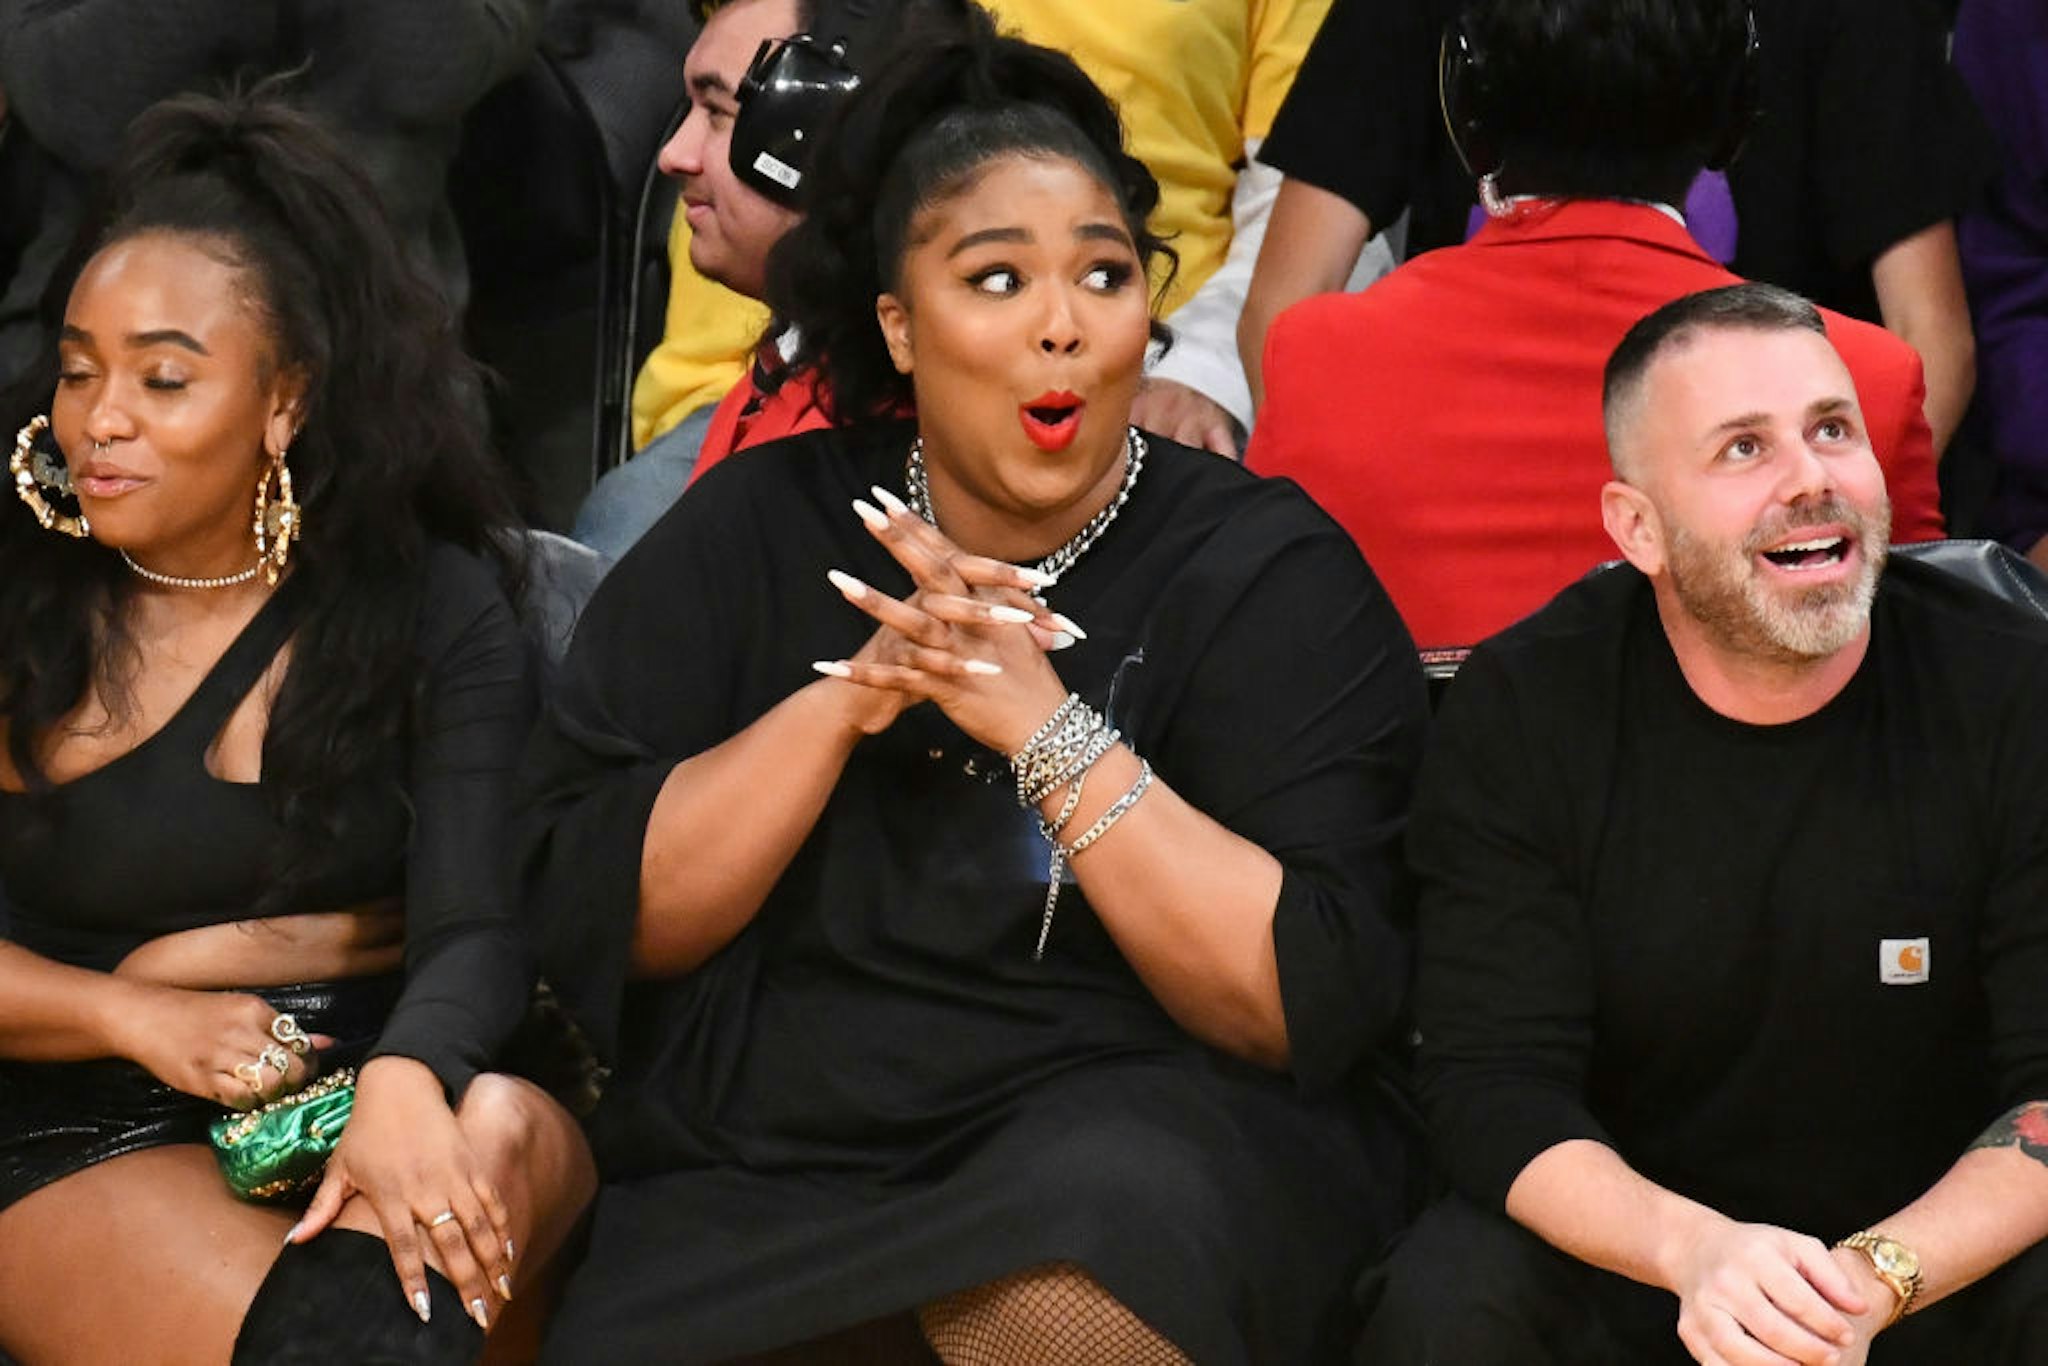 Singer Lizzo (C) attends a basketball game between the Los Angeles Lakers and the Minnesota Timberwolves at Staples Center on December 08, 2019 in Los Angeles, California.